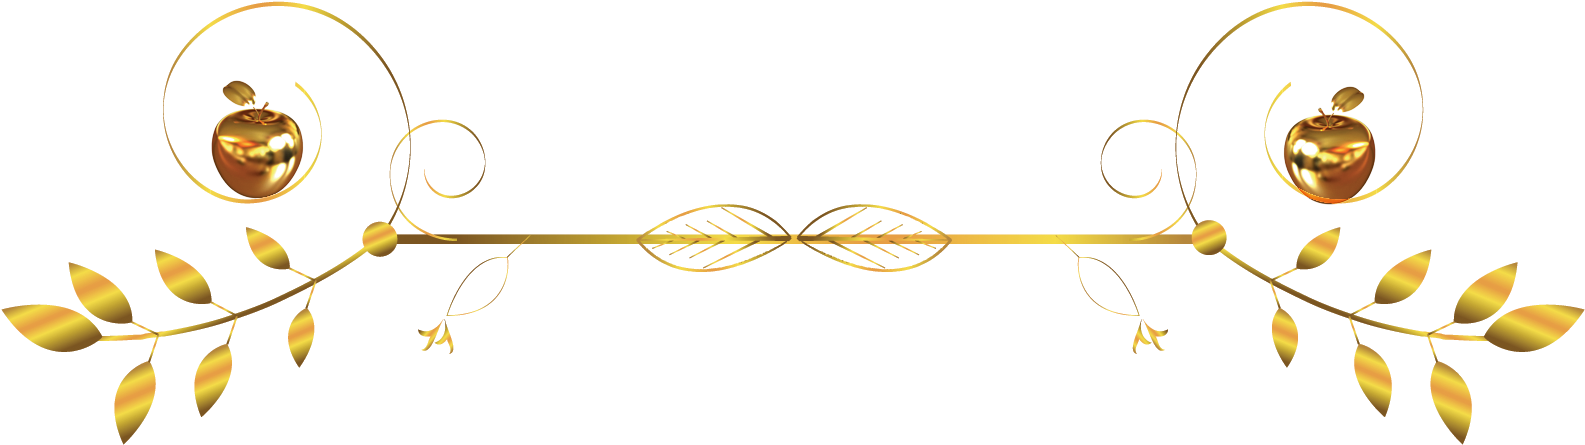 Download Gold Divider Png Gold Text Dividers Png Png Image With No Background Pngkey Com